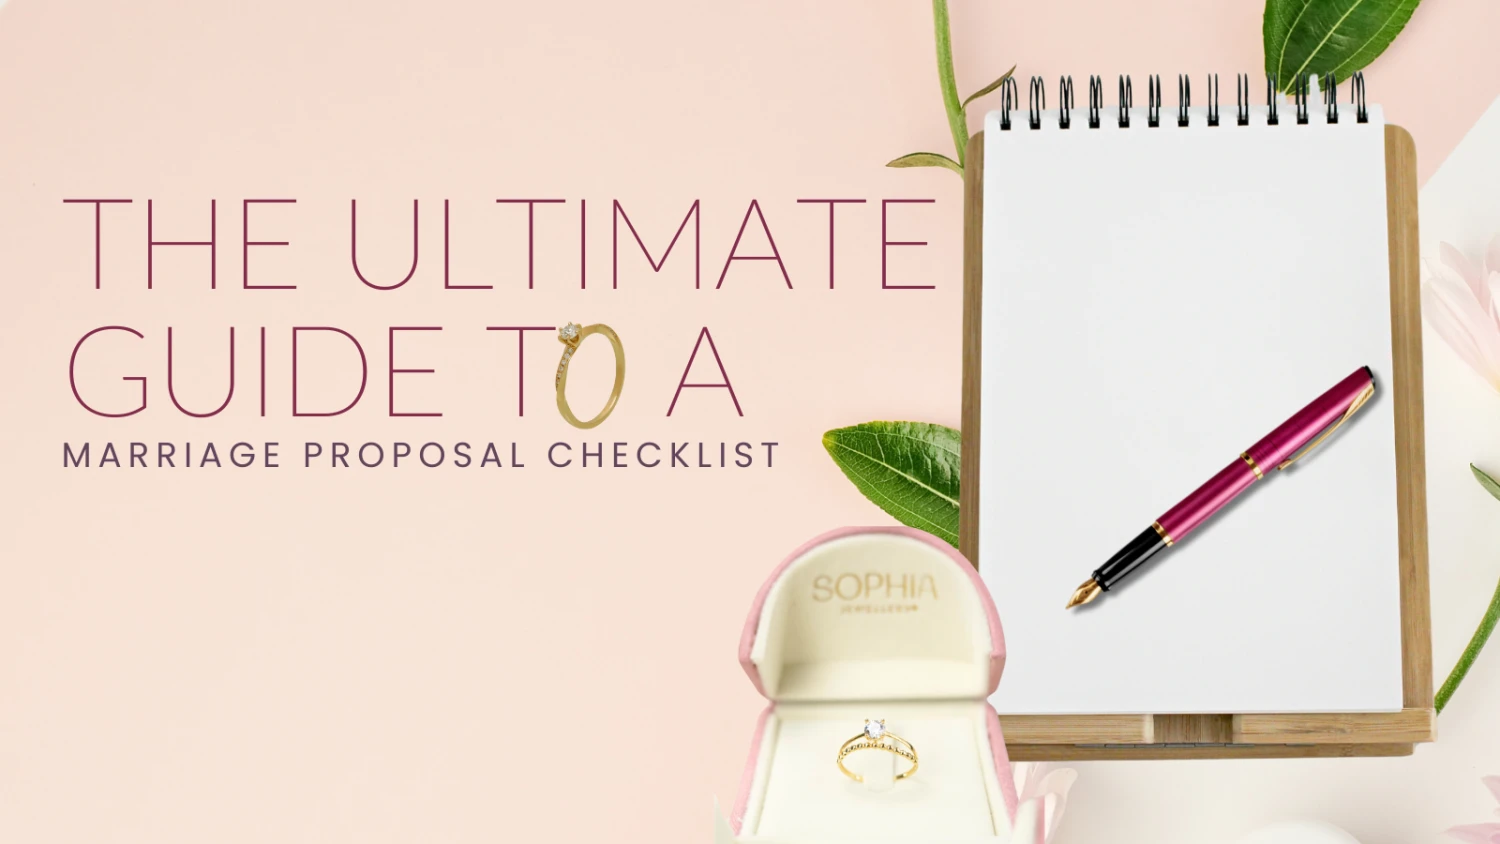 The Ultimate Guide To A Marriage Proposal Checklist